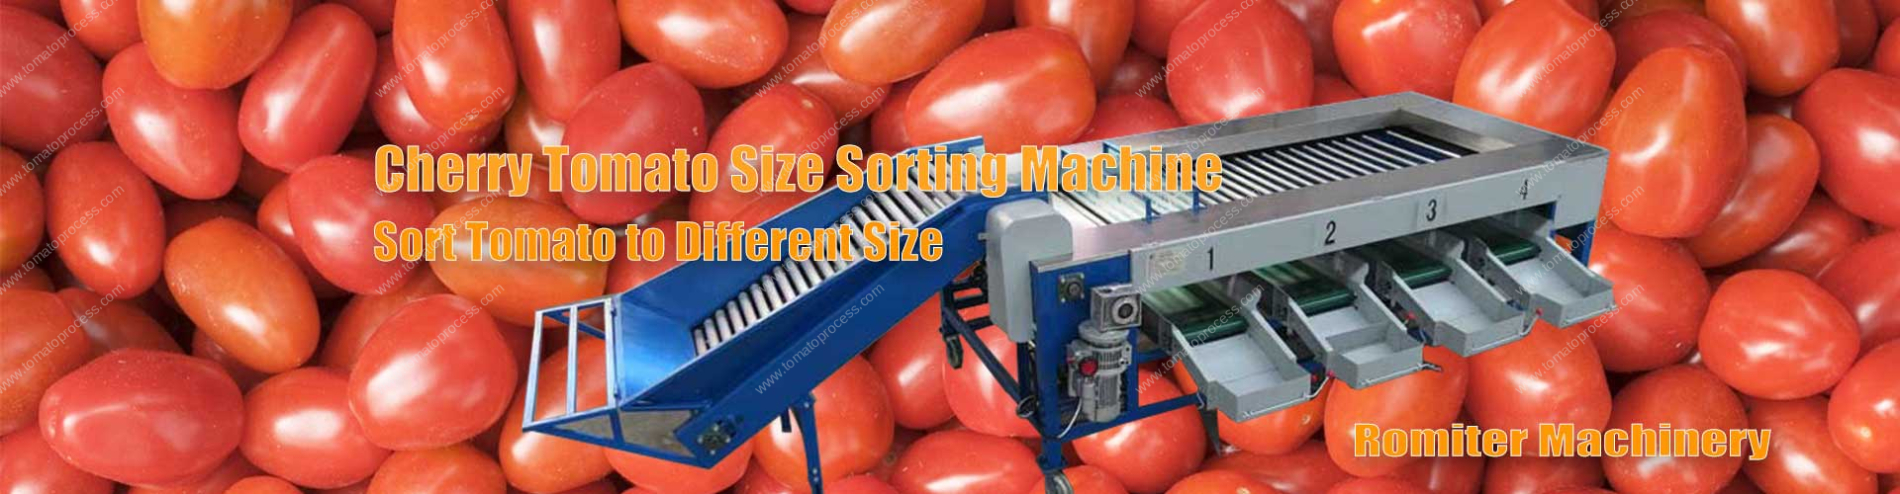 Banner01-Cherry-Tomato-Size-Sorting-Grading-Machine-Supplier-Manufacture